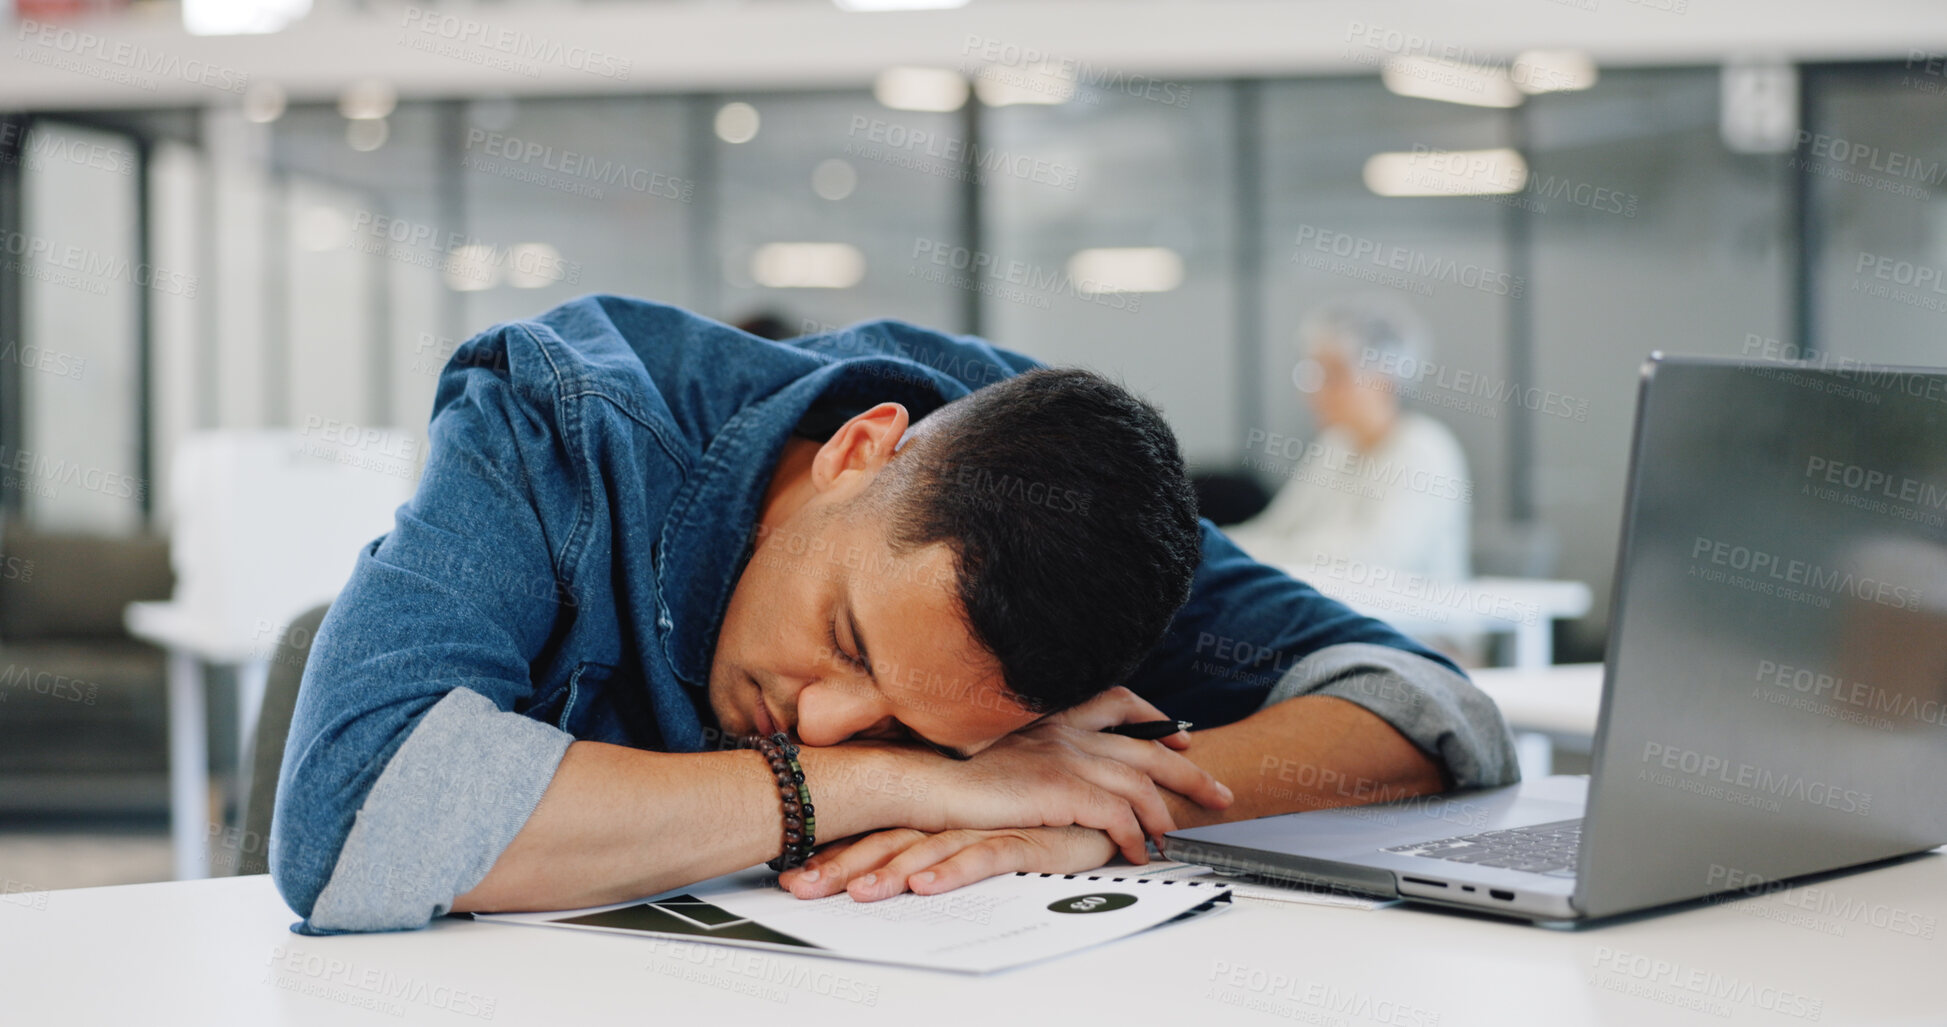 Buy stock photo Tired man, laptop and sleeping on desk in burnout, fatigue or taking a nap and overworked at office. Exhausted male person or employee asleep in stress, anxiety or overtime on table at workplace